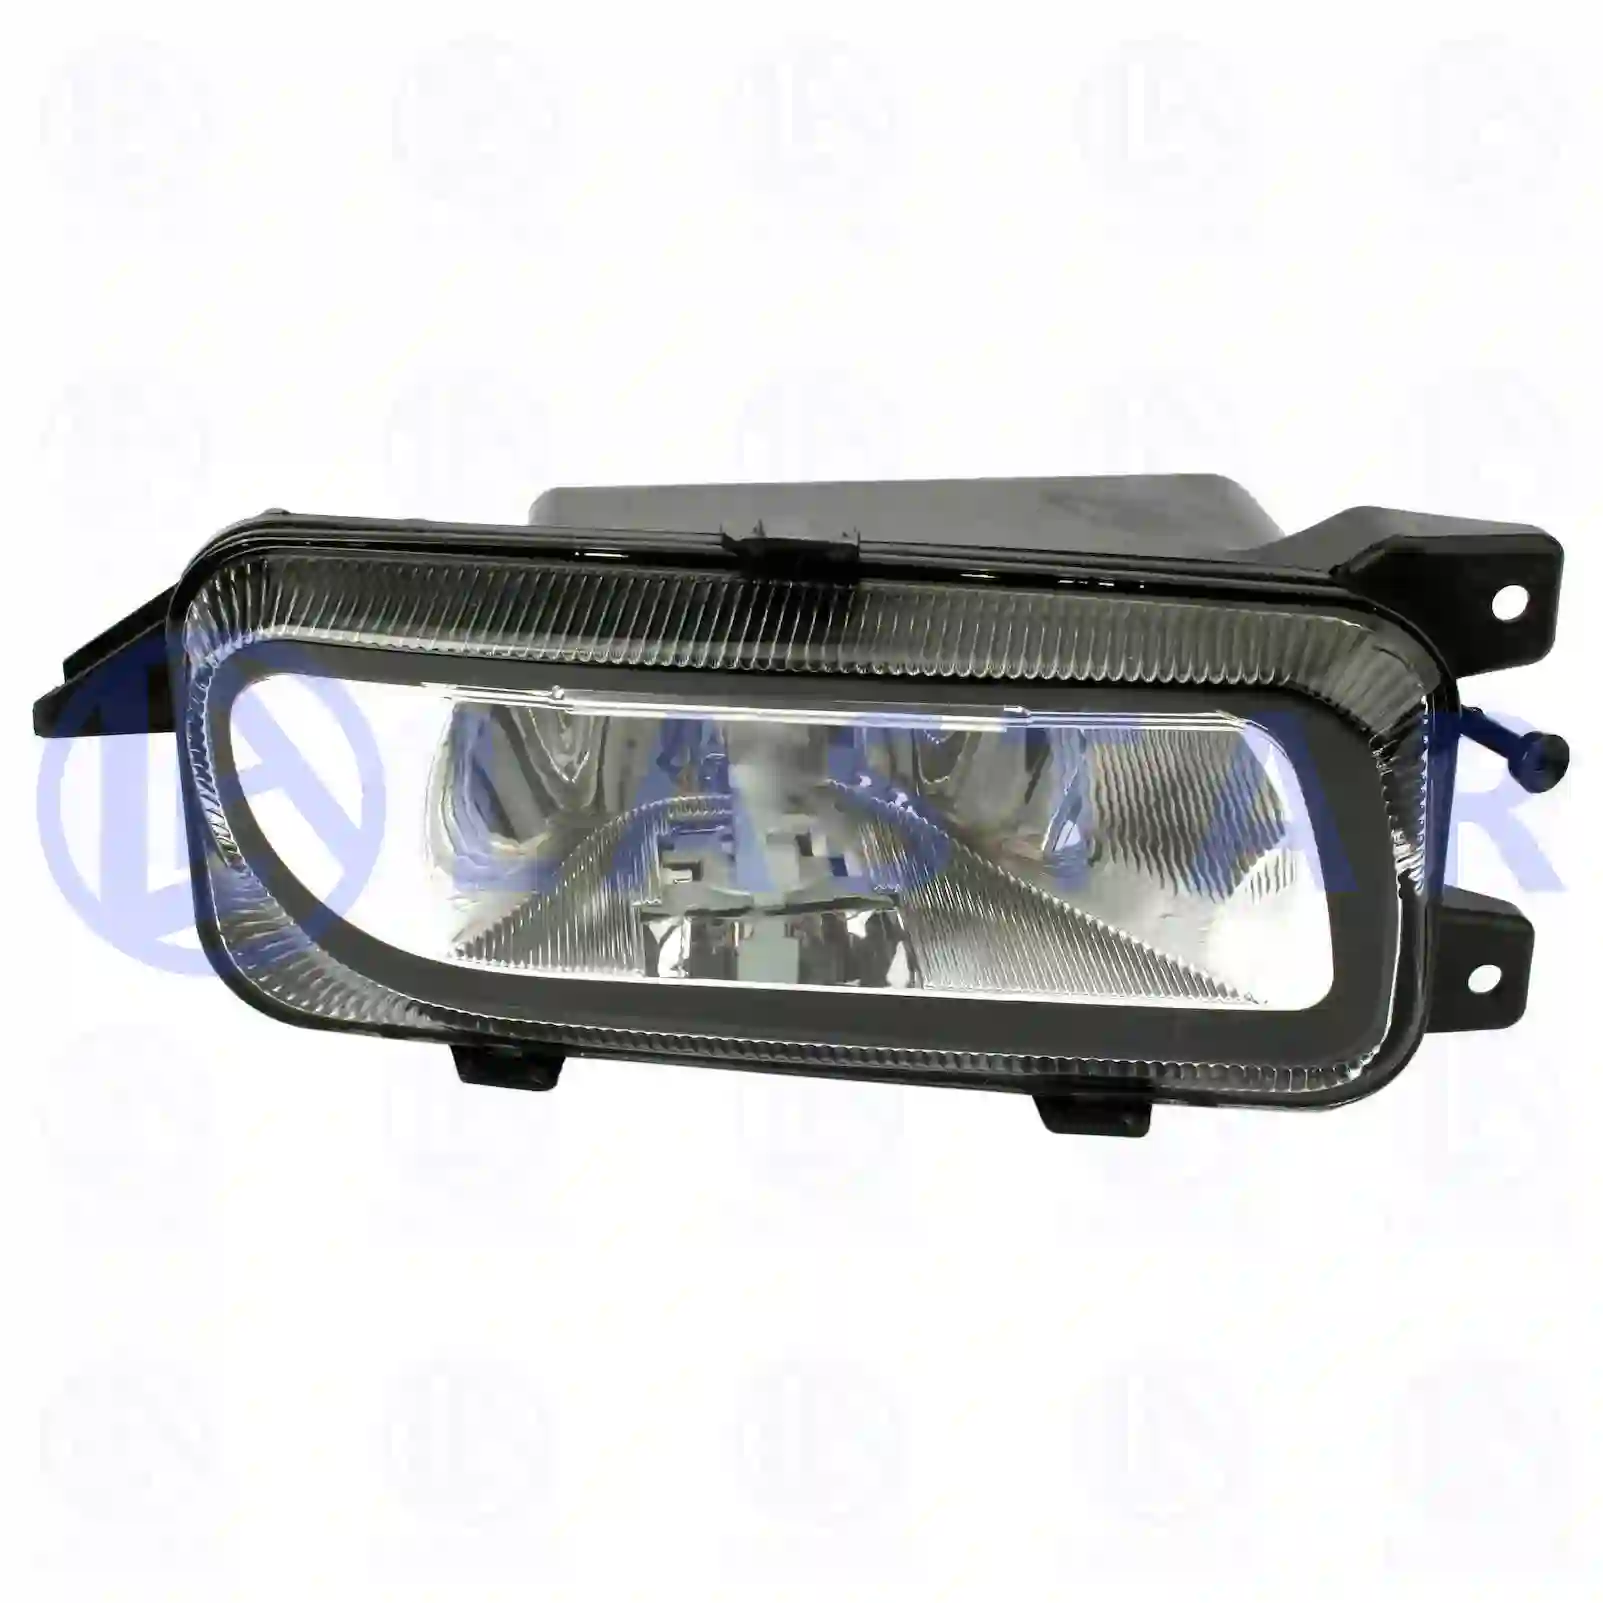 Fog lamp, right, without bulb, 77710813, 0038207656, 9438200156, ZG20430-0008 ||  77710813 Lastar Spare Part | Truck Spare Parts, Auotomotive Spare Parts Fog lamp, right, without bulb, 77710813, 0038207656, 9438200156, ZG20430-0008 ||  77710813 Lastar Spare Part | Truck Spare Parts, Auotomotive Spare Parts